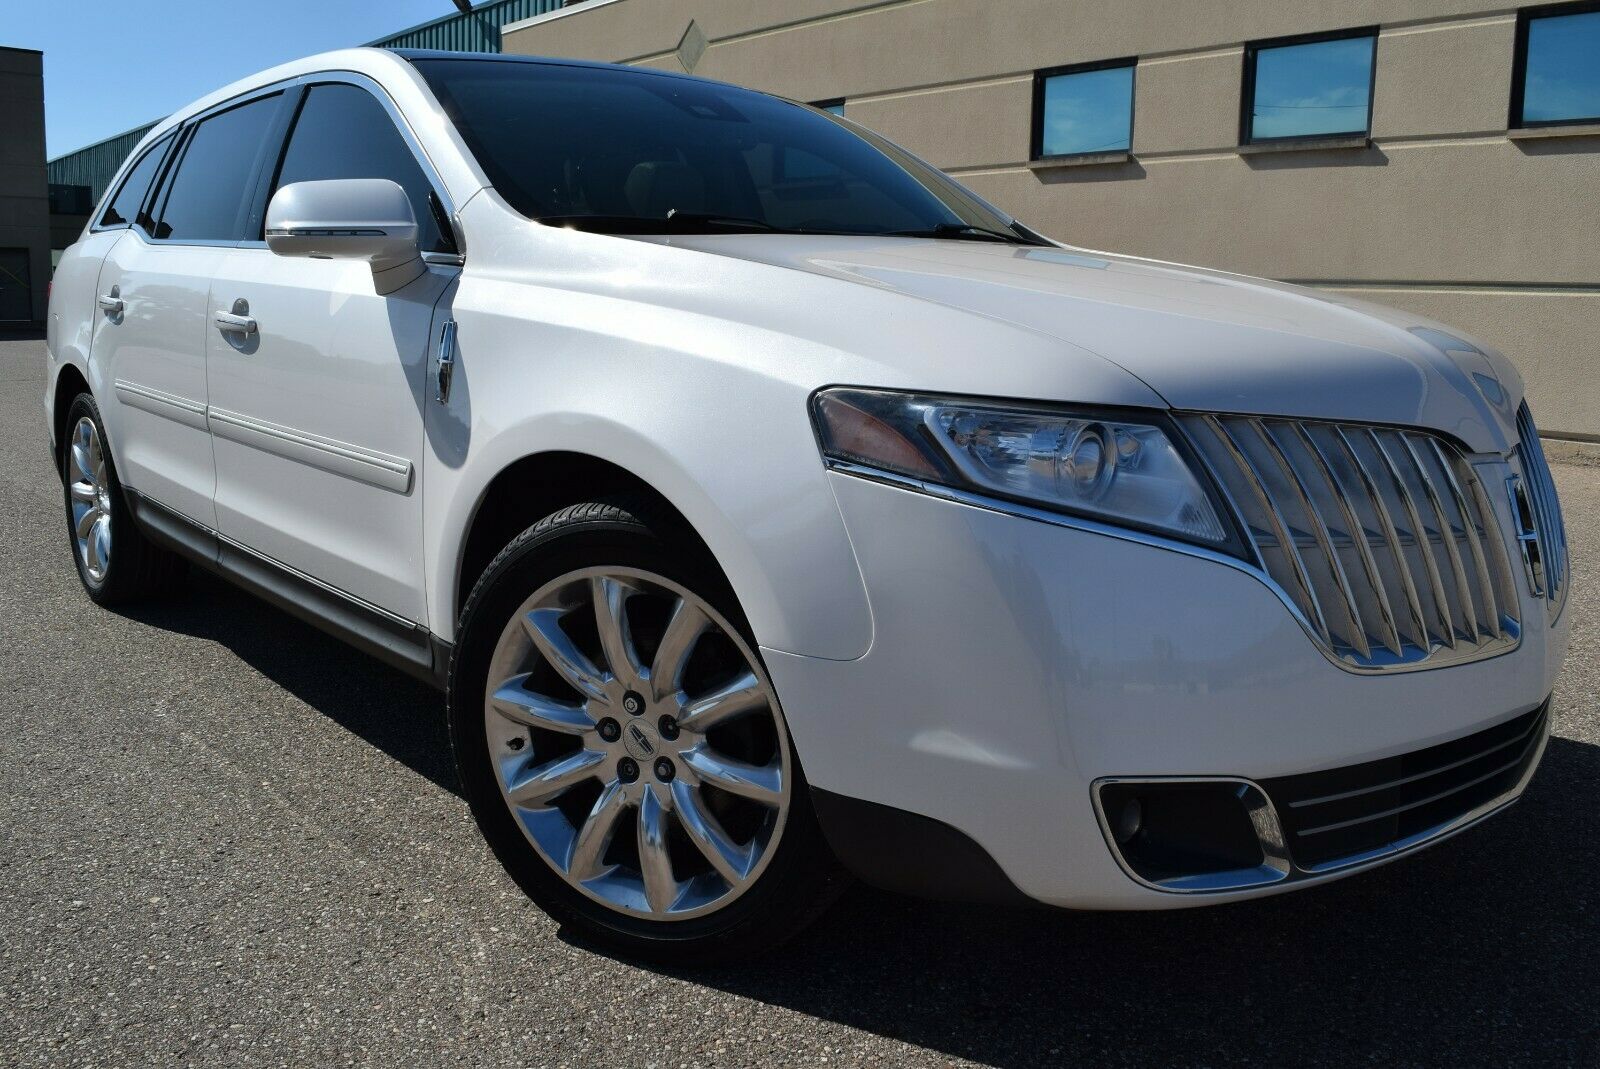 2010 Lincoln Mkt Awd Technology & Elite Packages-edition 2010 Lincoln Mkt Premium & Elite Suv 3.7l/v6/awd/panoramic/navigation/camera/20"